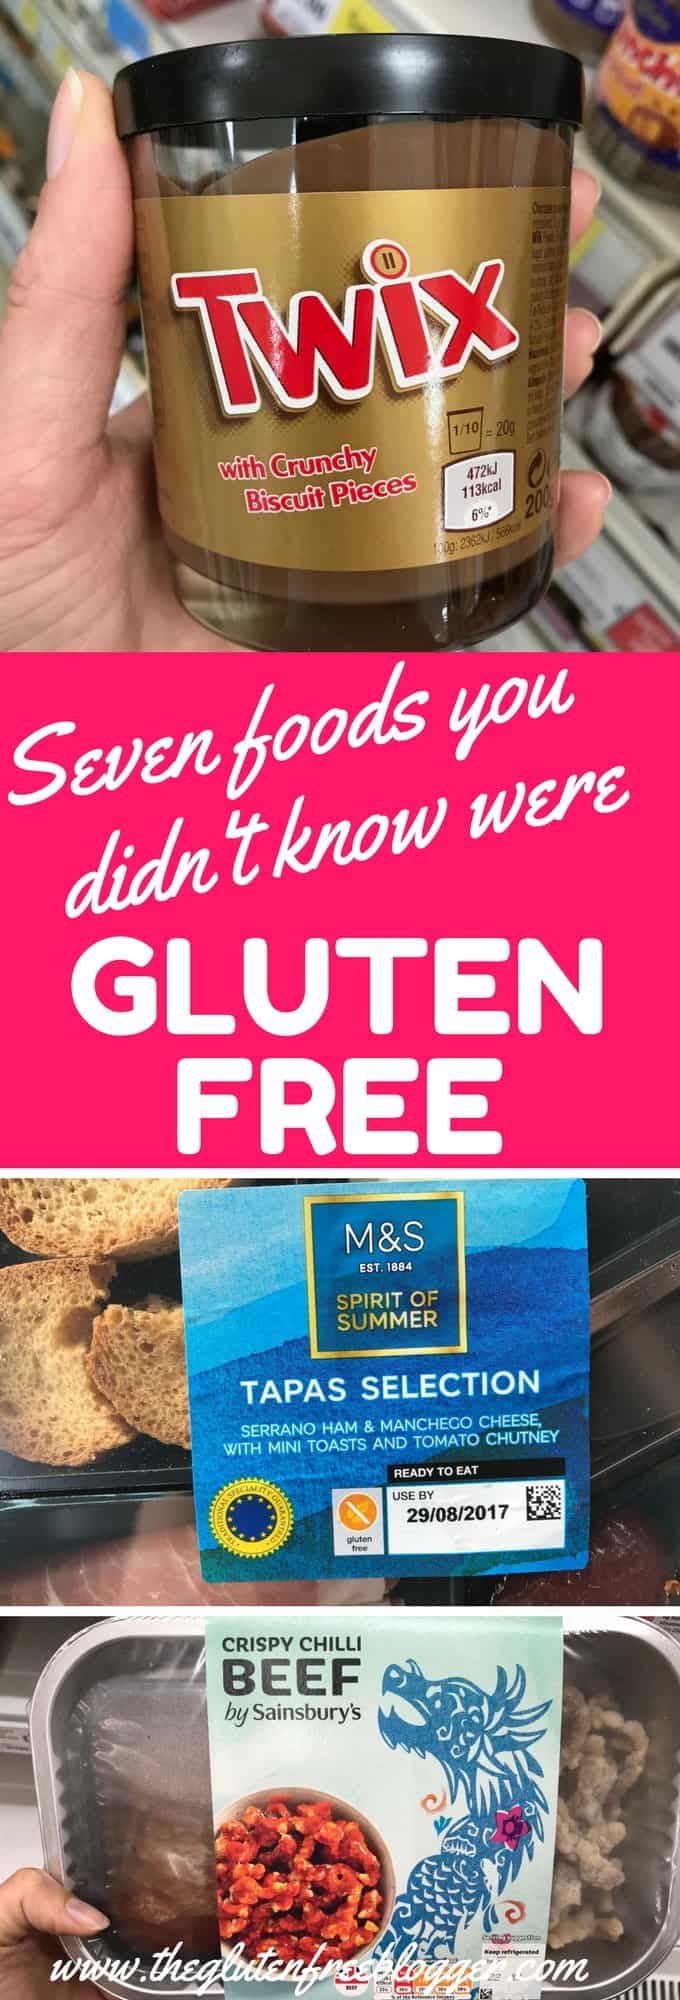 Seven foods you didn't know were gluten free in the UK by The Gluten Free Blogger - www.theglutenfreeblogger.com